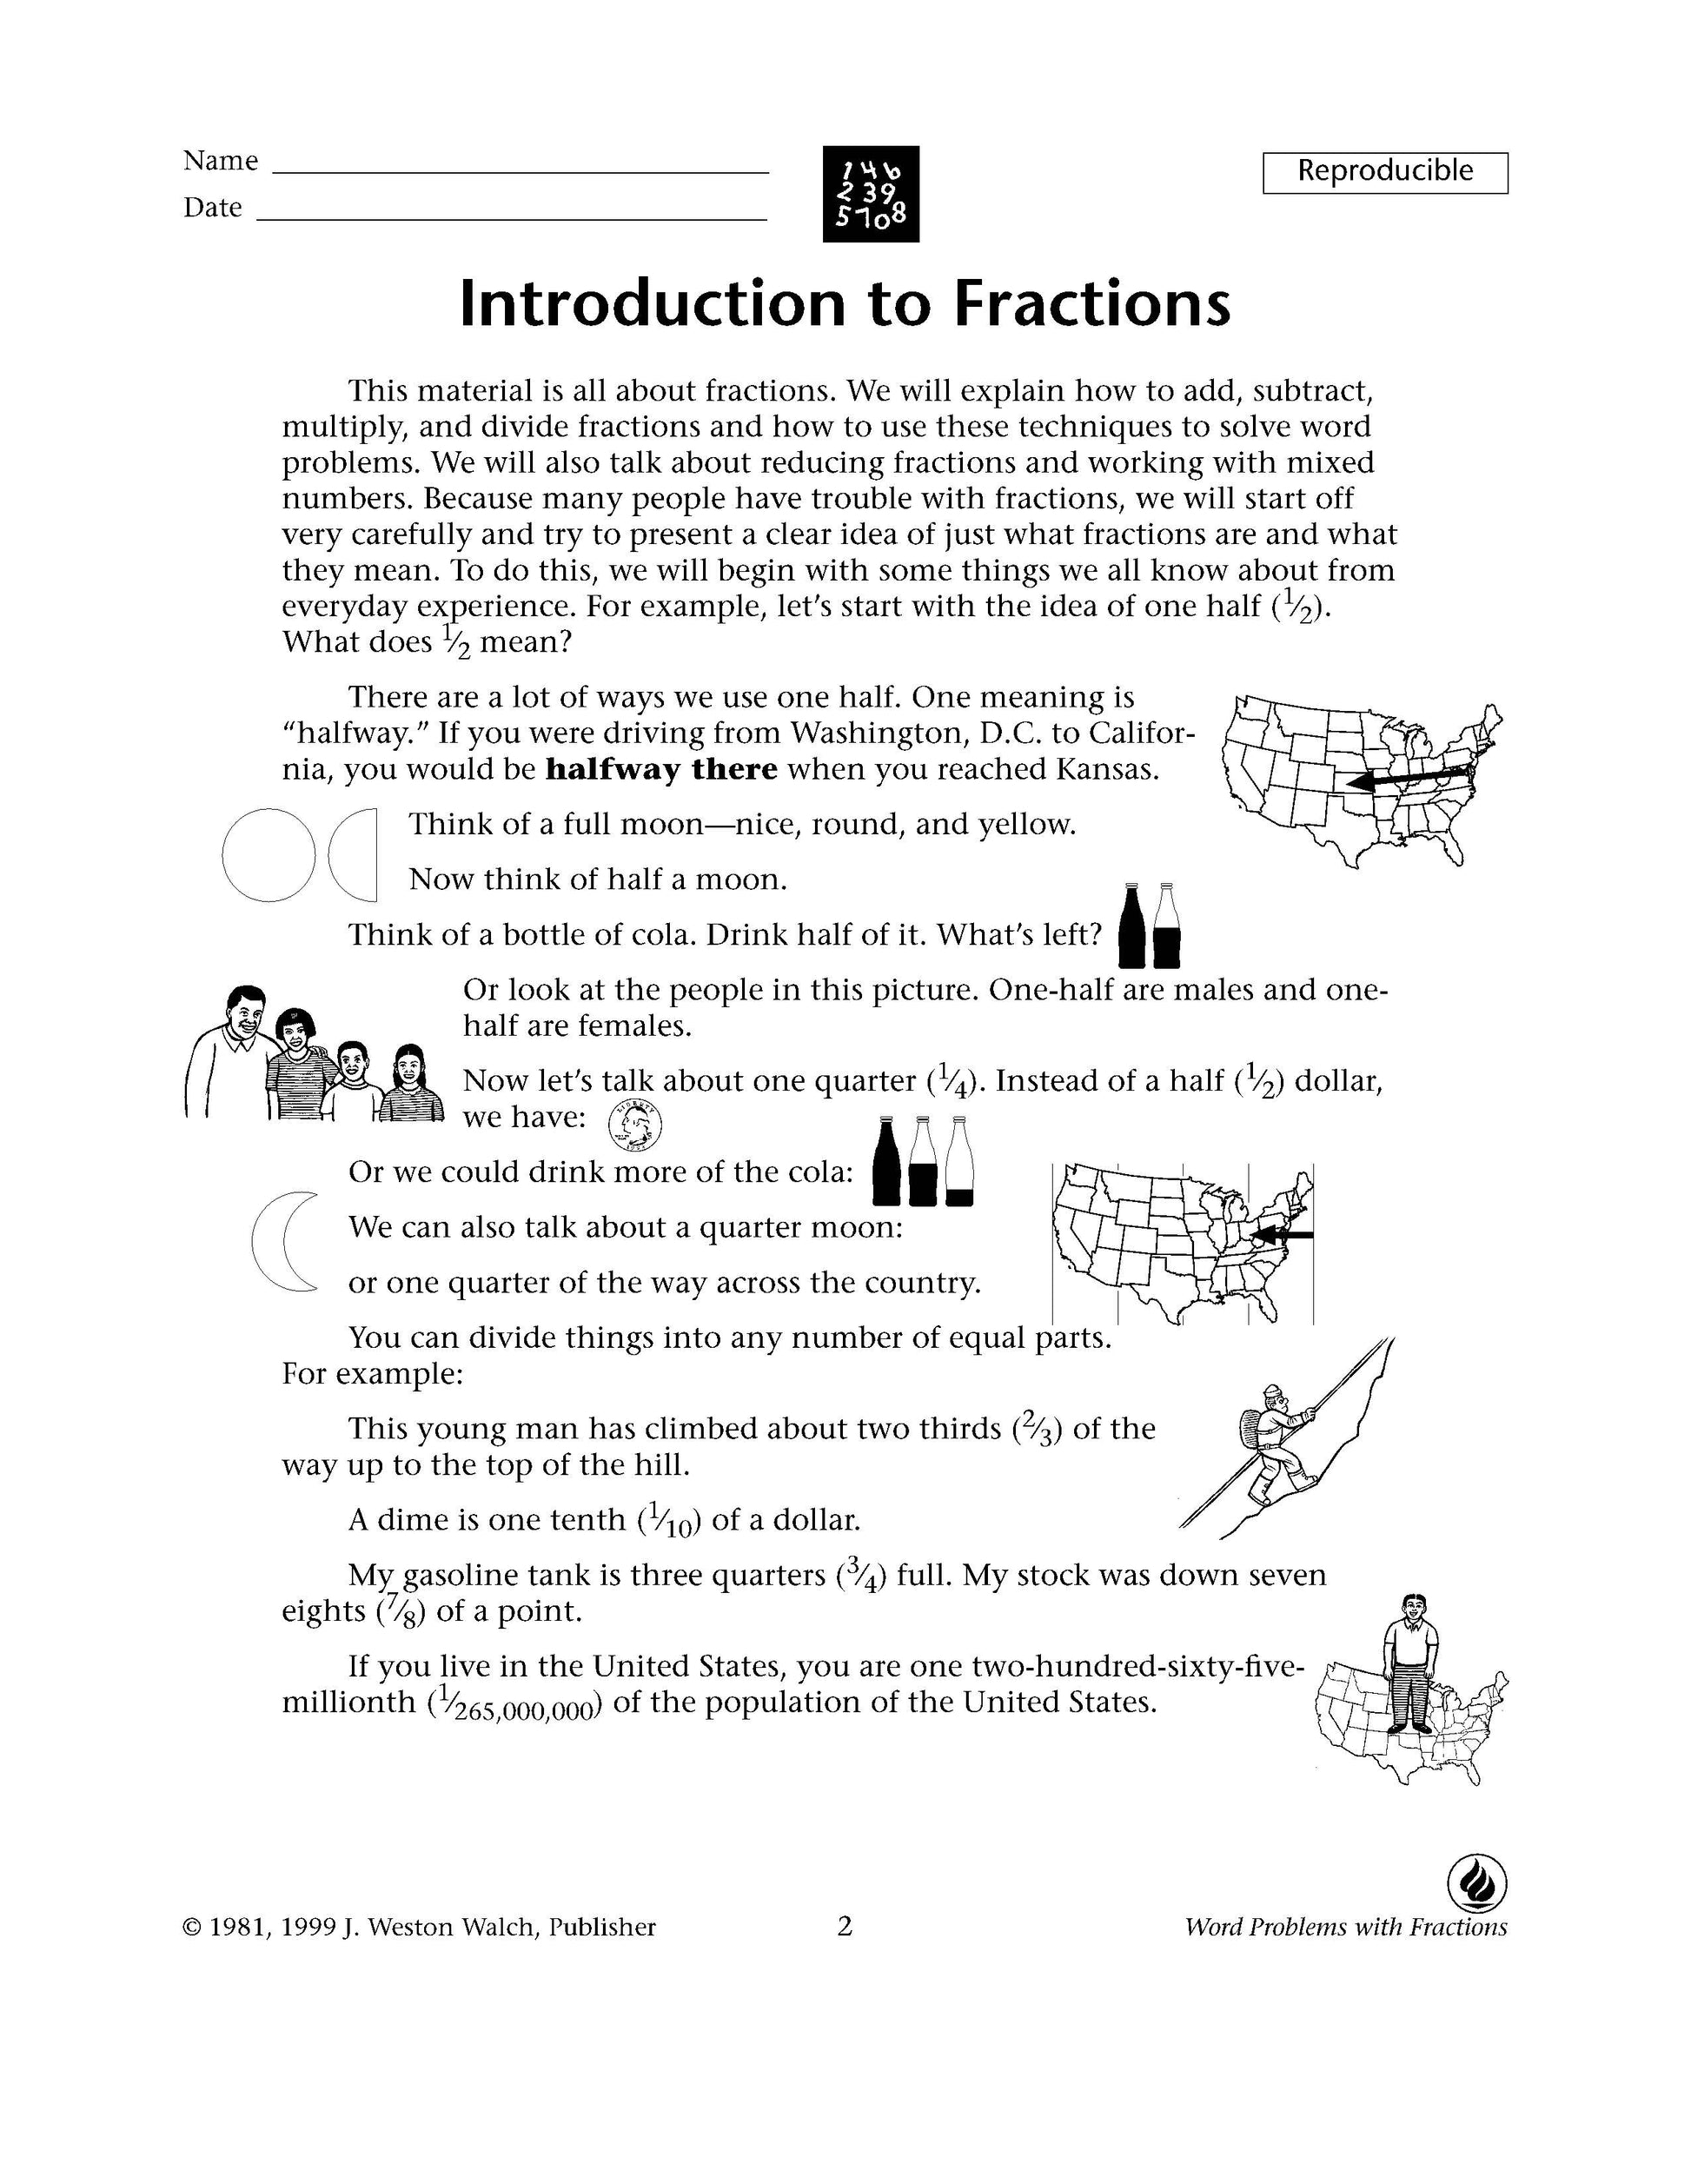 Bright Education Australia, Teacher Resources, Maths, Books, Word Problems with Fractions 